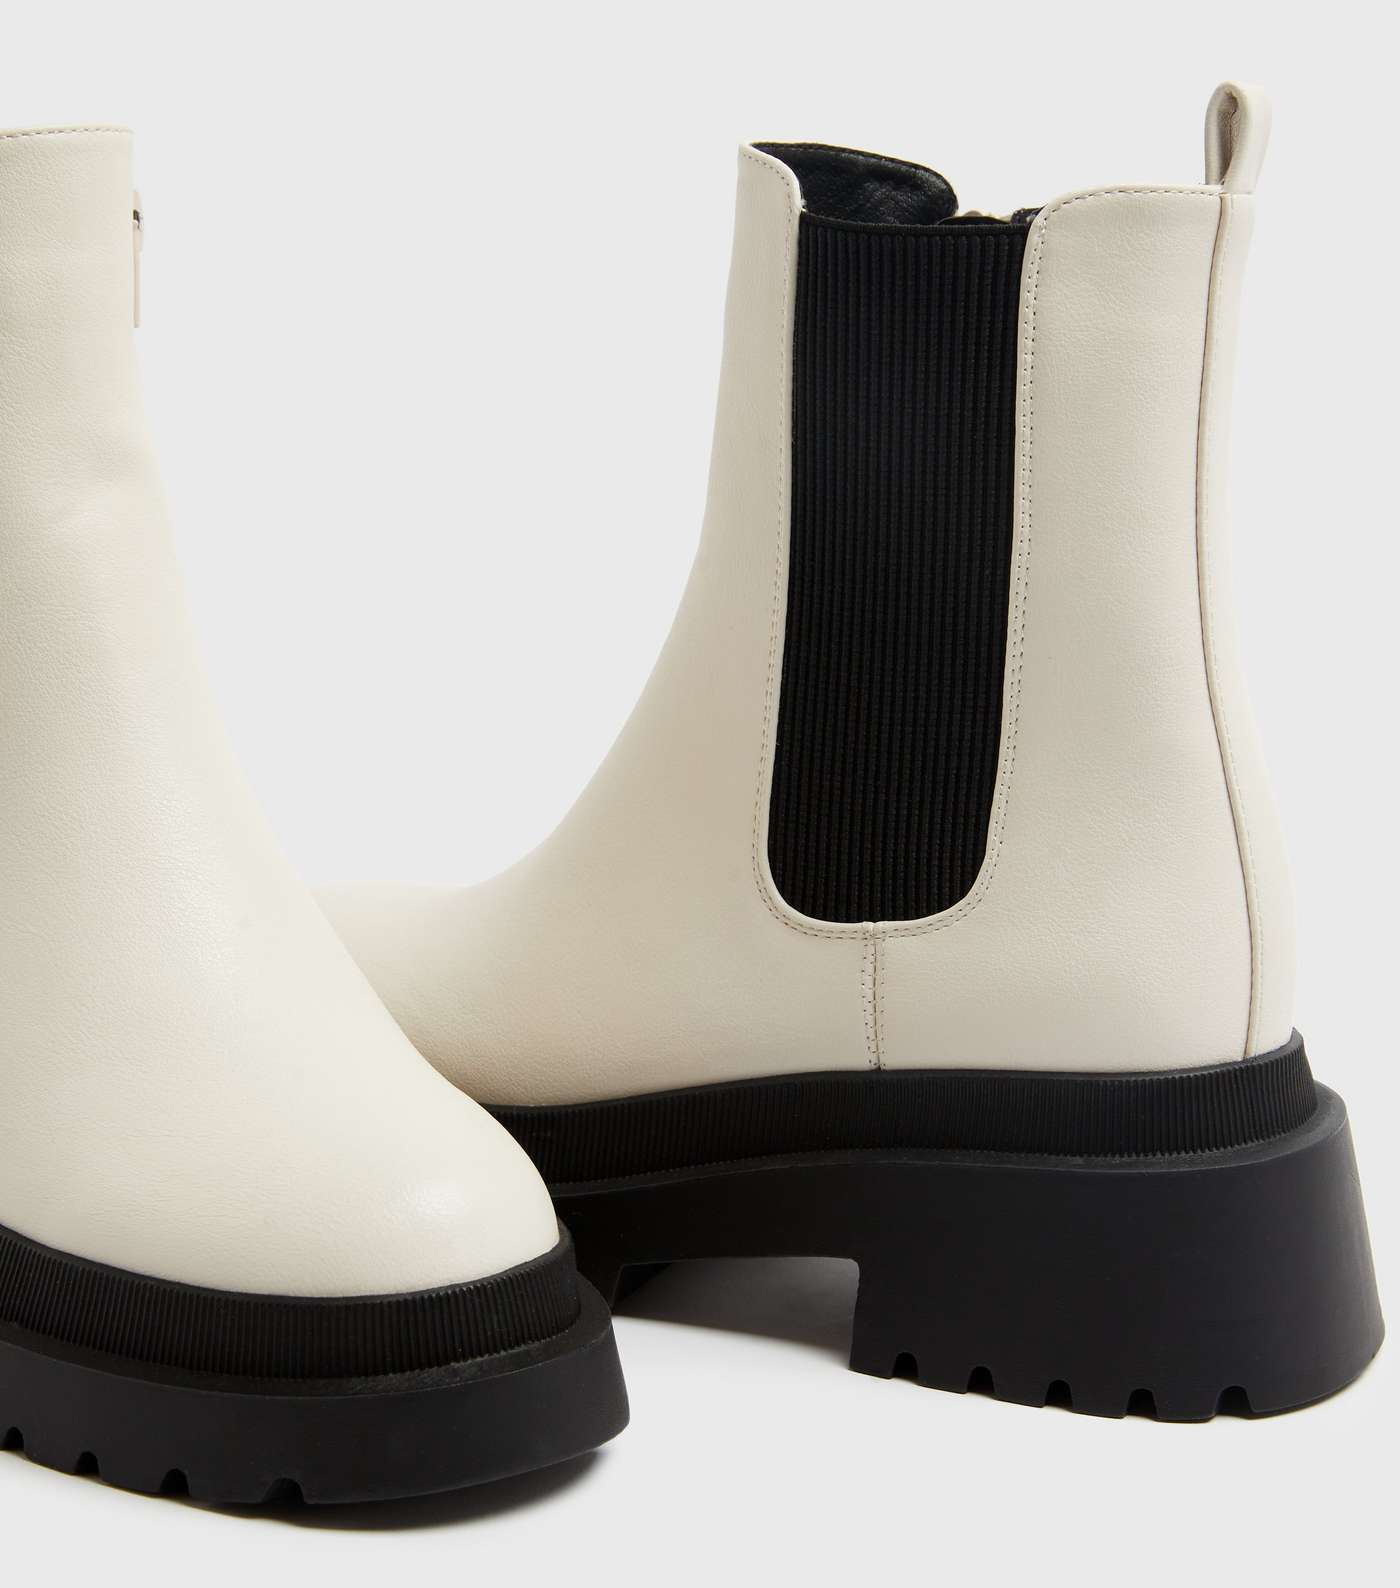 Off White Leather-Look High Ankle Chelsea Boots Image 4